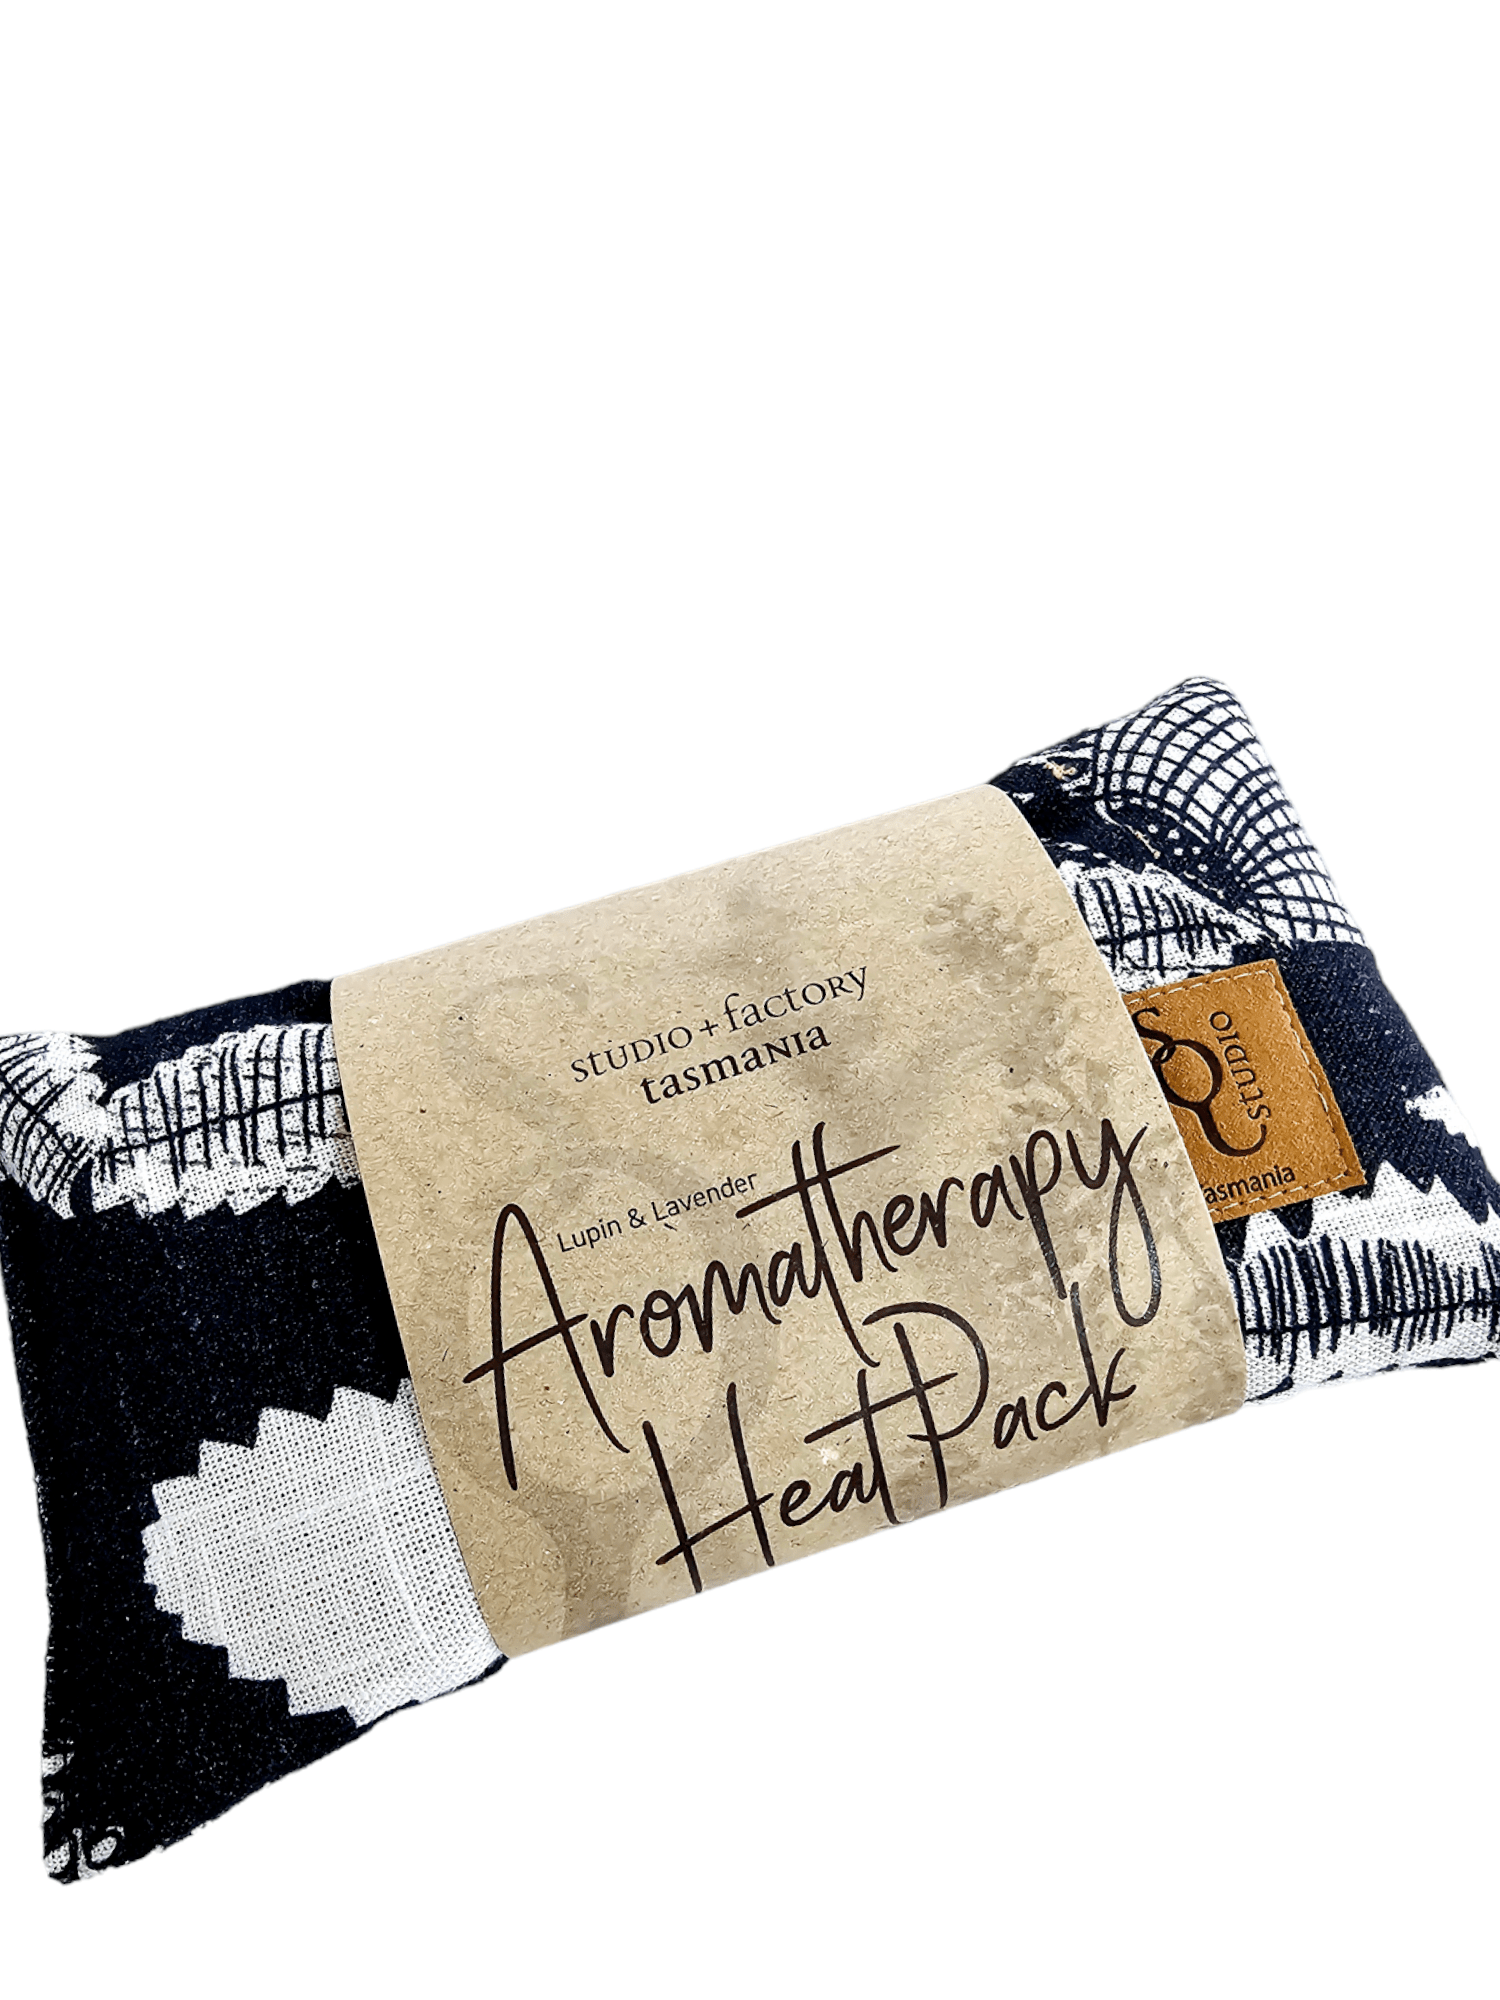 Aromatherapy Heat/Cold pack - Lupin & Lavender Heating Pads The Spotted Quoll Single Small Sawtooth Banksia 